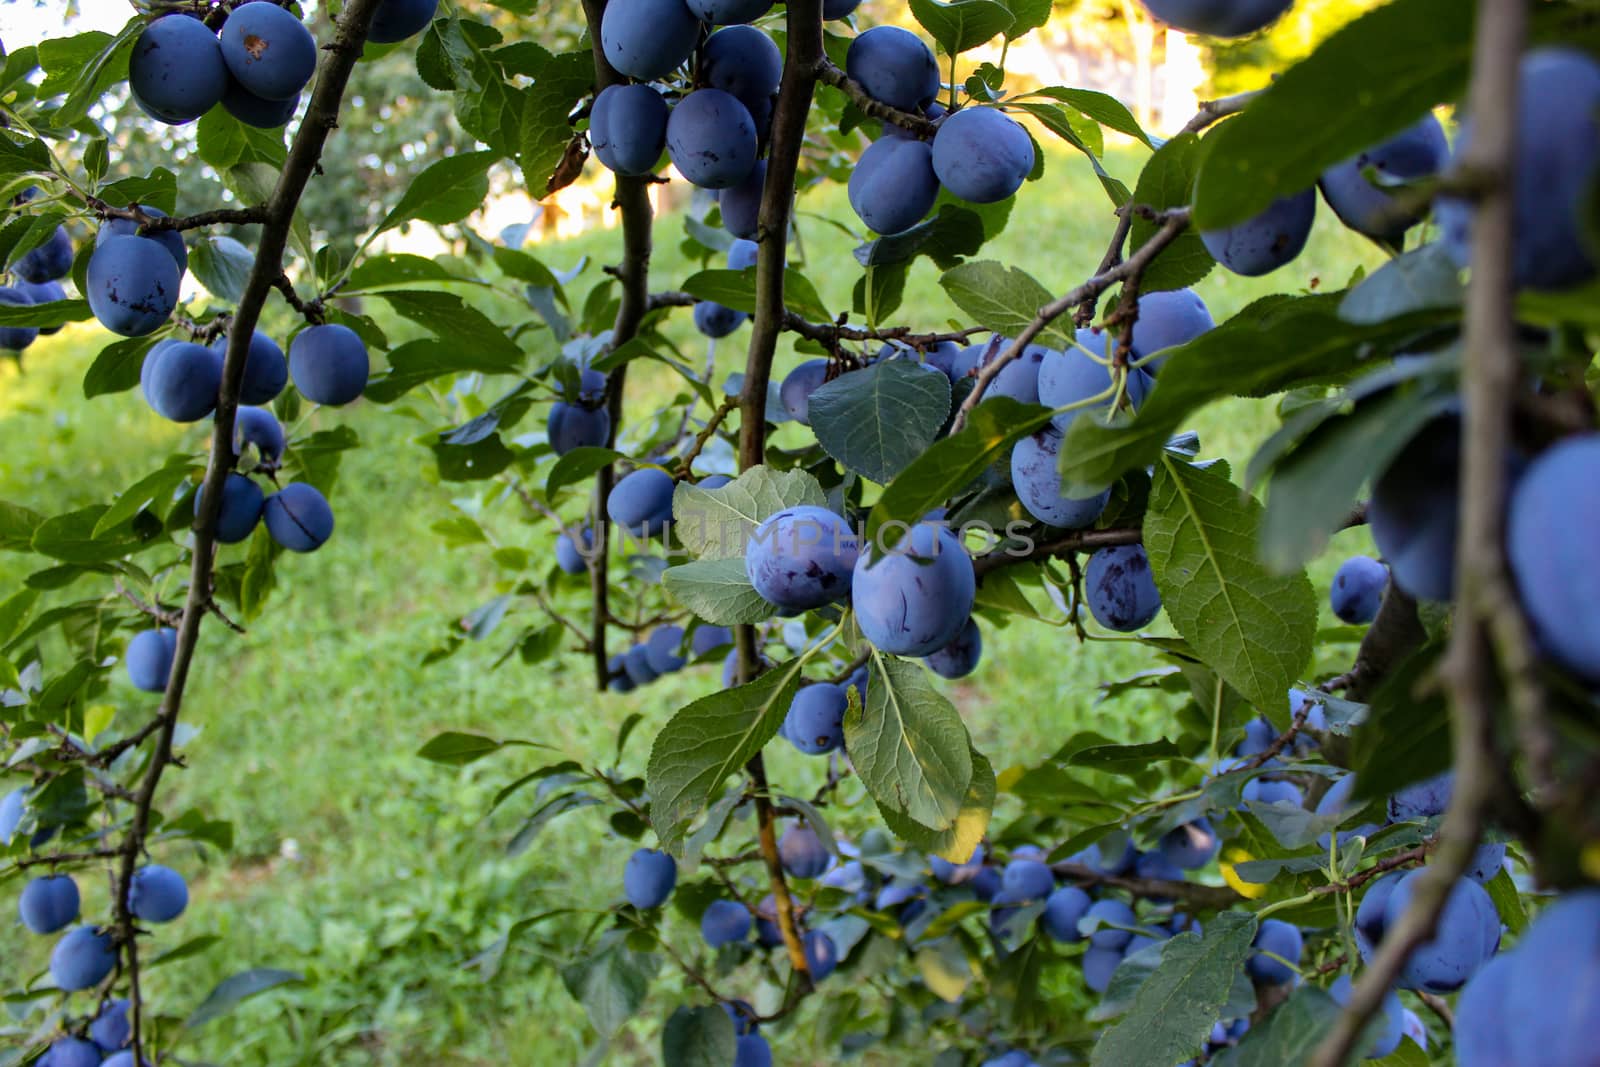 Lots of ripe plums on the branches in the plum orchard. by mahirrov